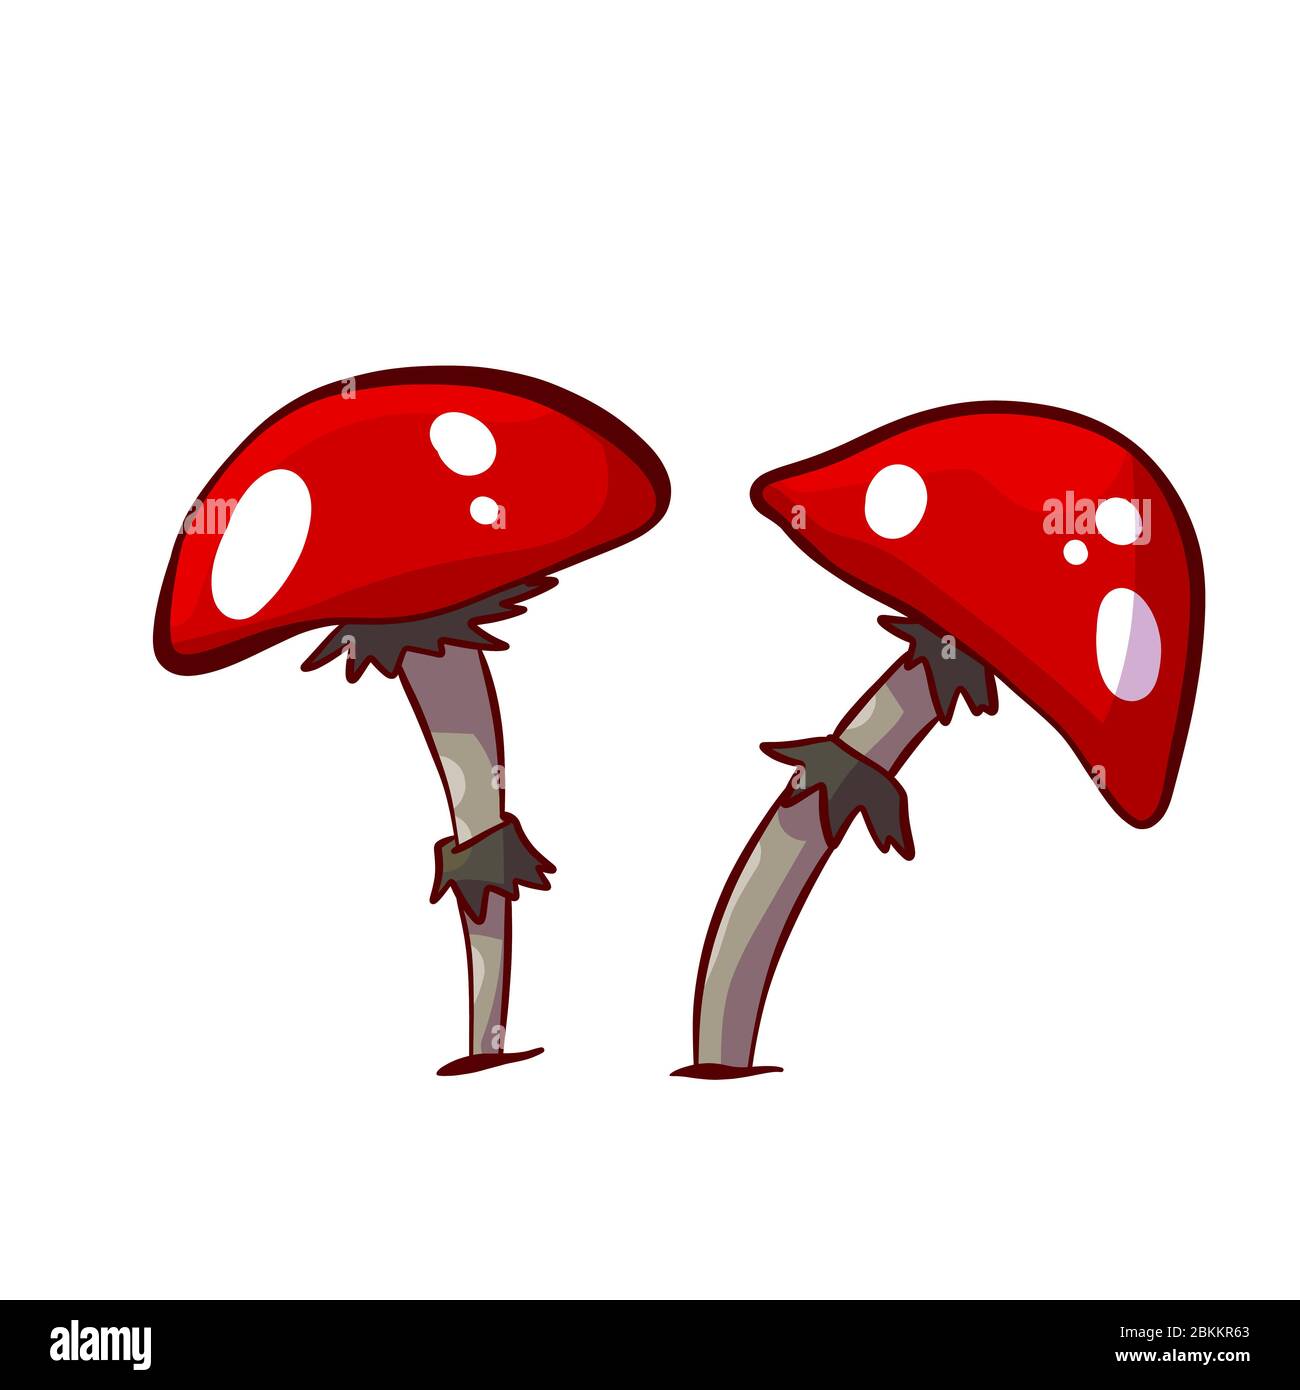 Colorful vector illustration of cartoon red mushrooms with white spots Stock Vector